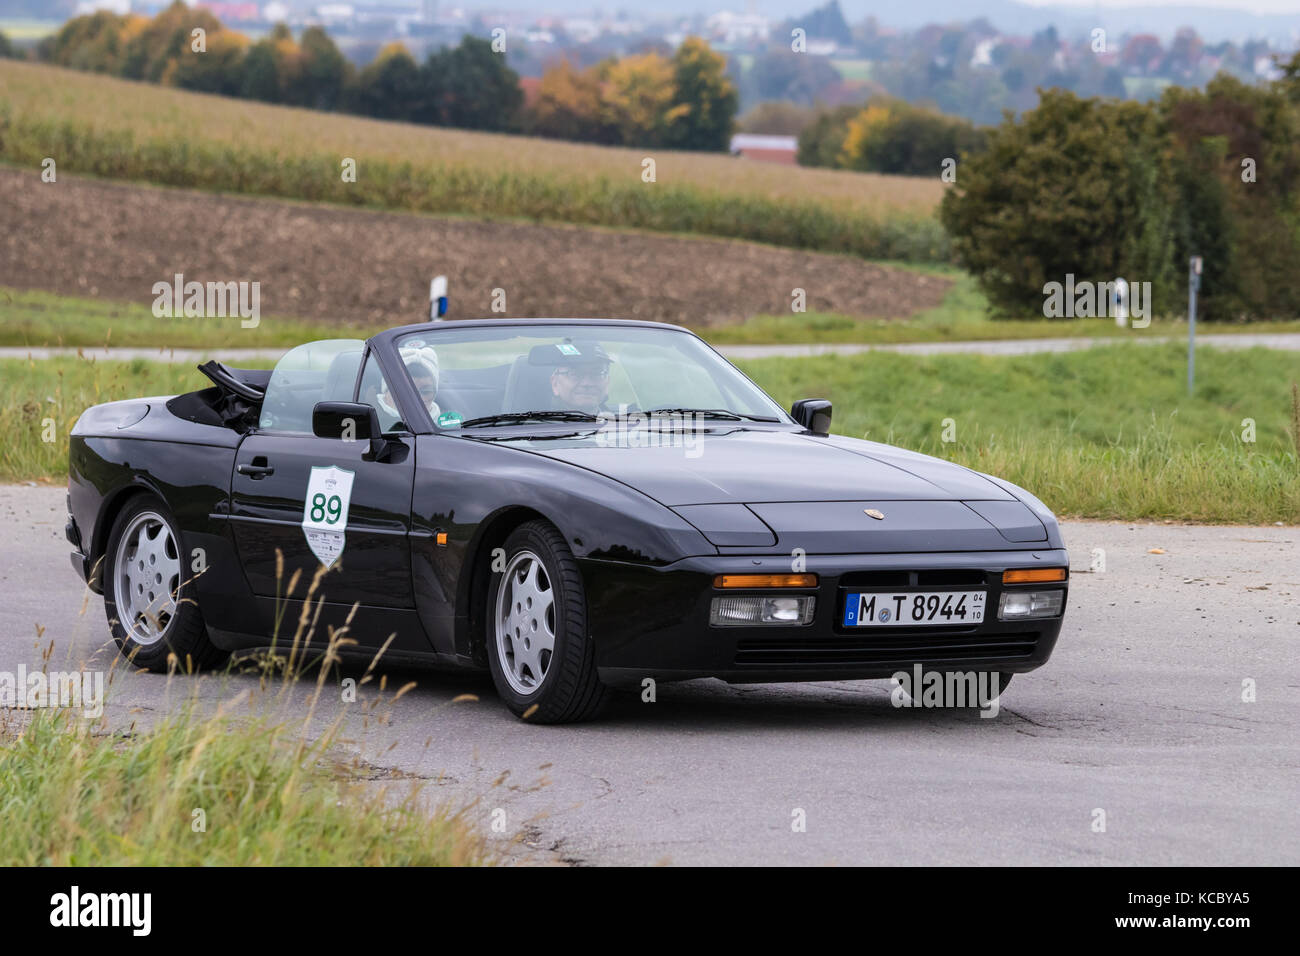 Augsburg, Germany - October 1, 2017: Porsche 944 oldtimer car at the Fuggerstadt Classic 2017 Oldtimer Rallye on October 1, 2017 in Augsburg, Germany. Stock Photo